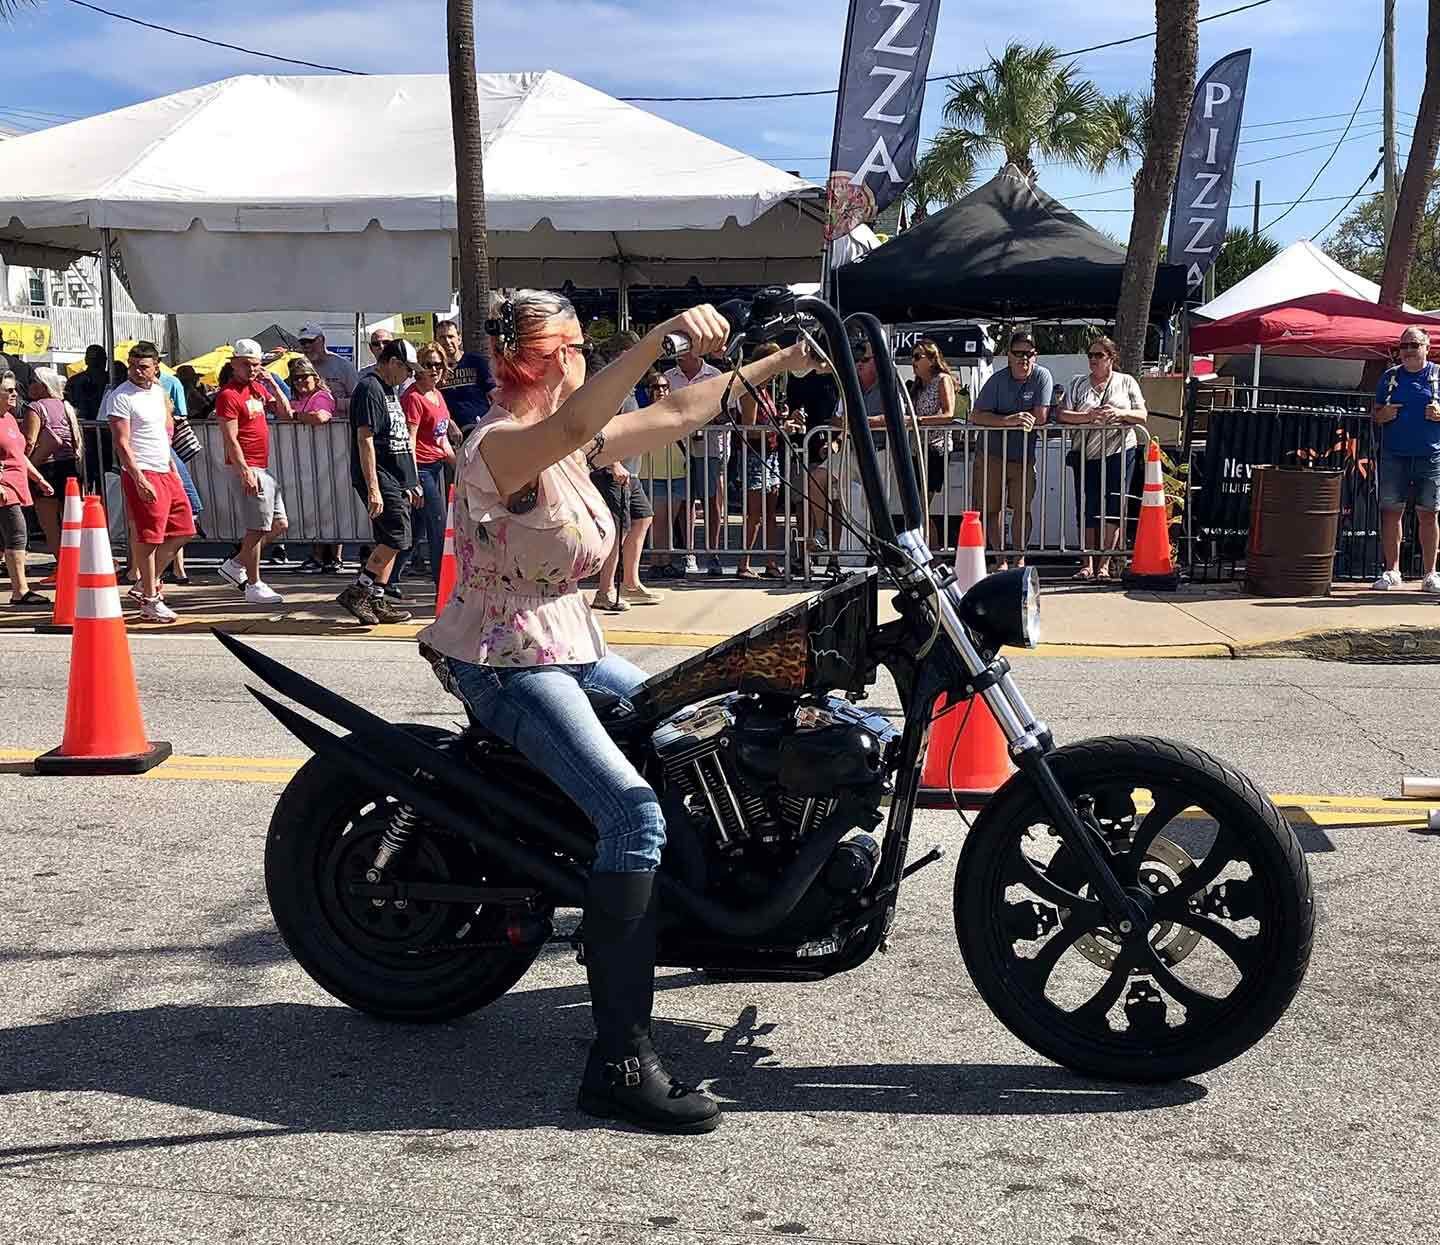 From the speedway to the beach and on everything from sportbikes to dressers to choppers, it was clear there were more women riders than ever at this year’s event.